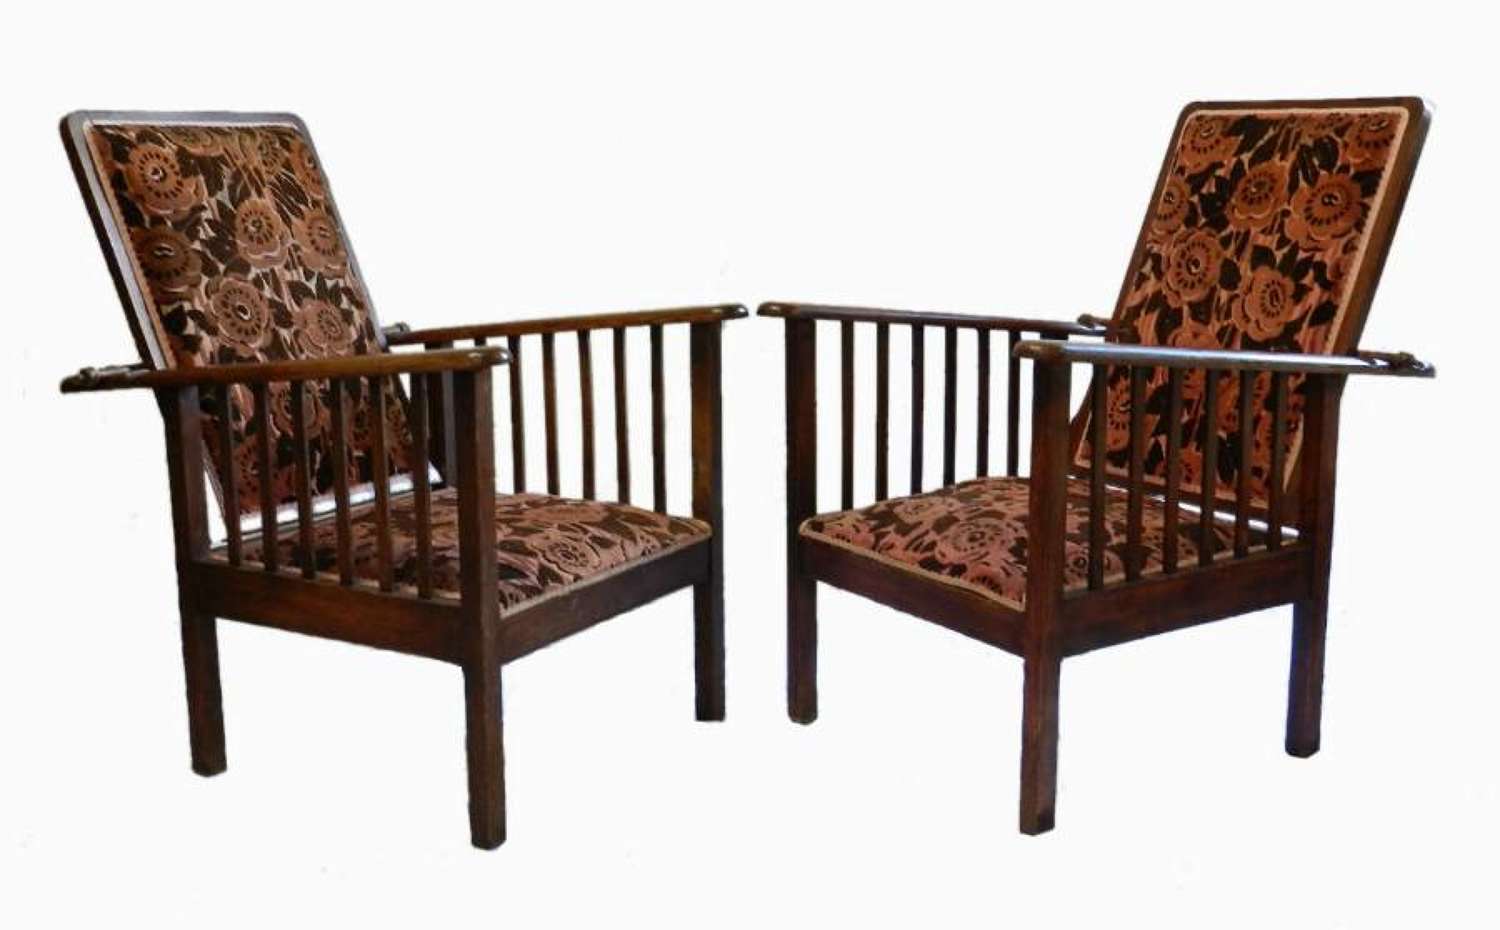 Pair of Arts and Crafts Morris Chairs reclining Armchairs